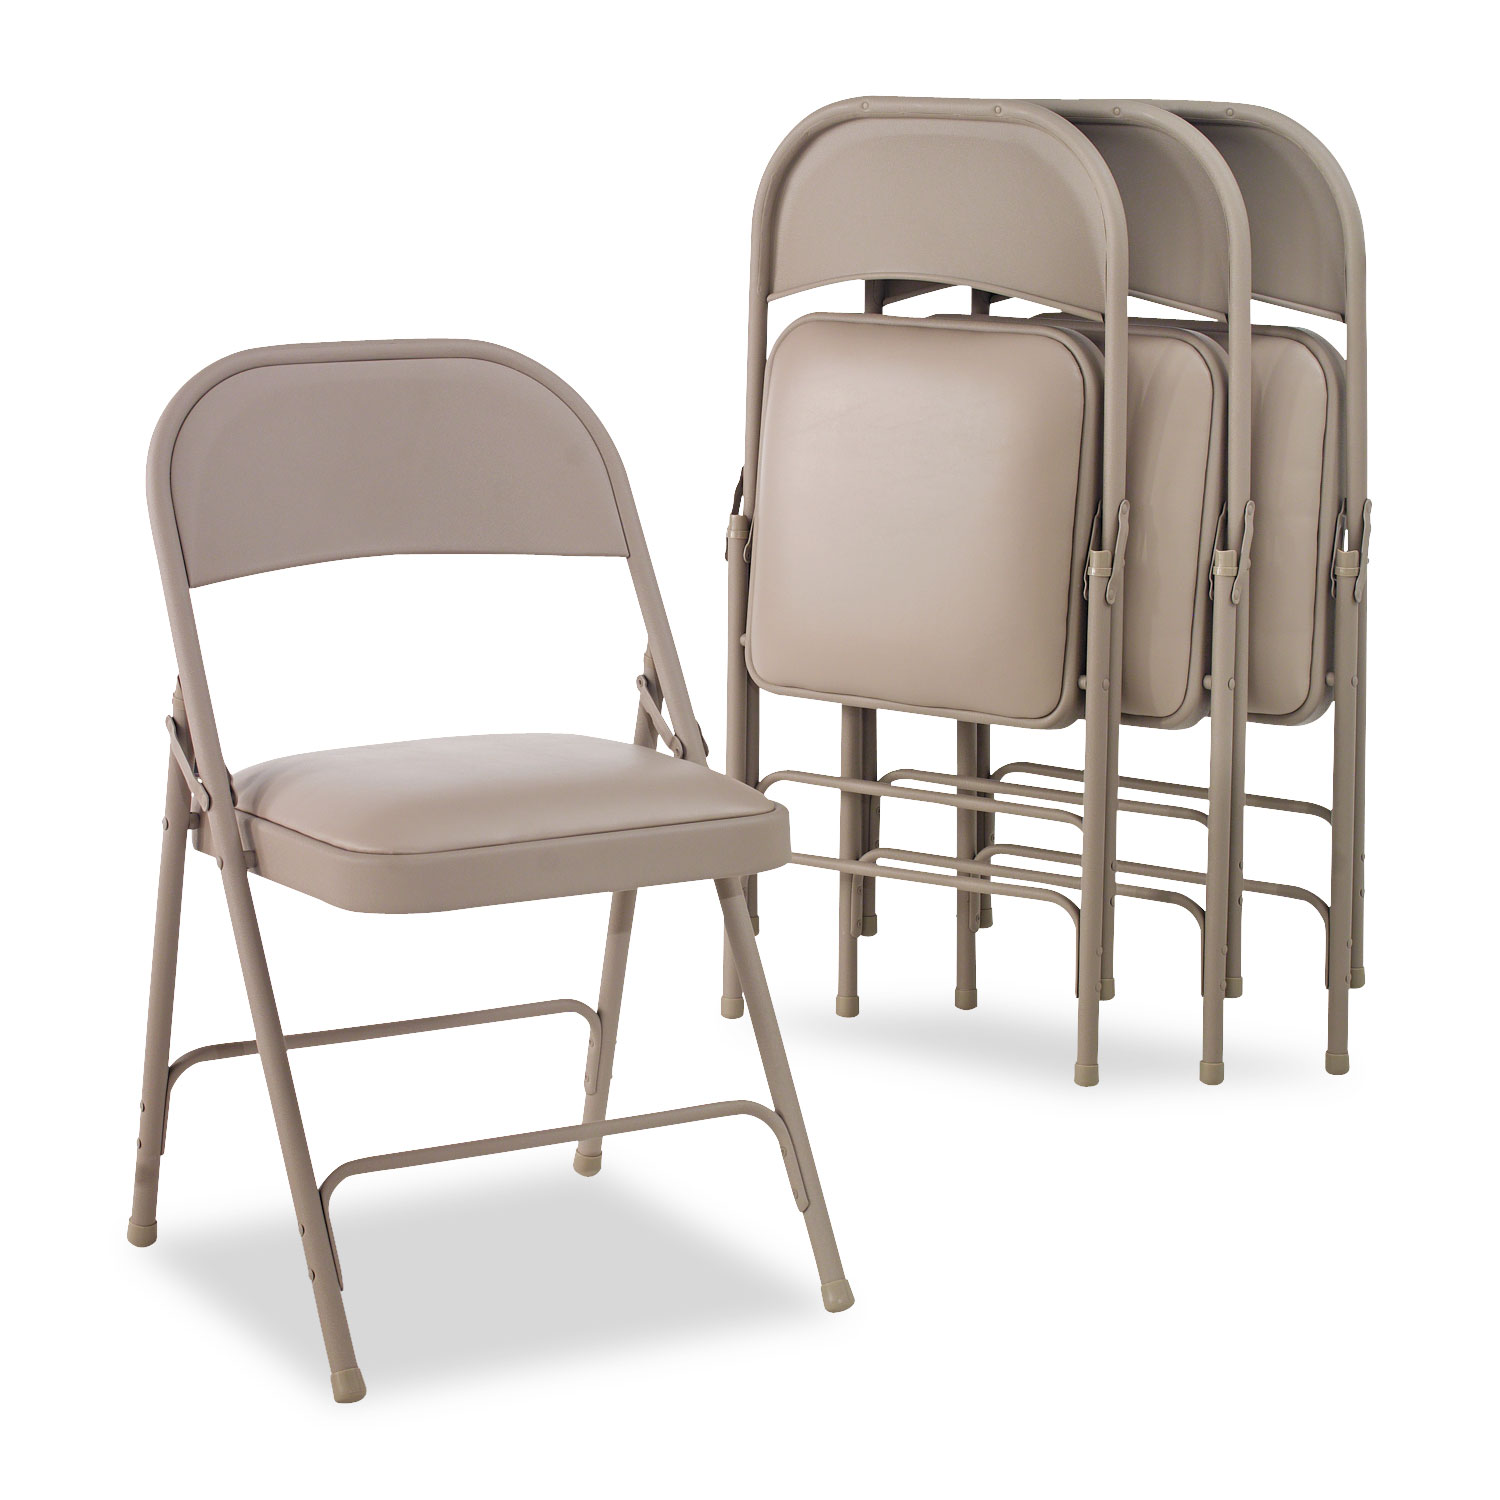 Steel Folding Chair with Two-Brace Support, Padded Seat, Tan, 4/Carton